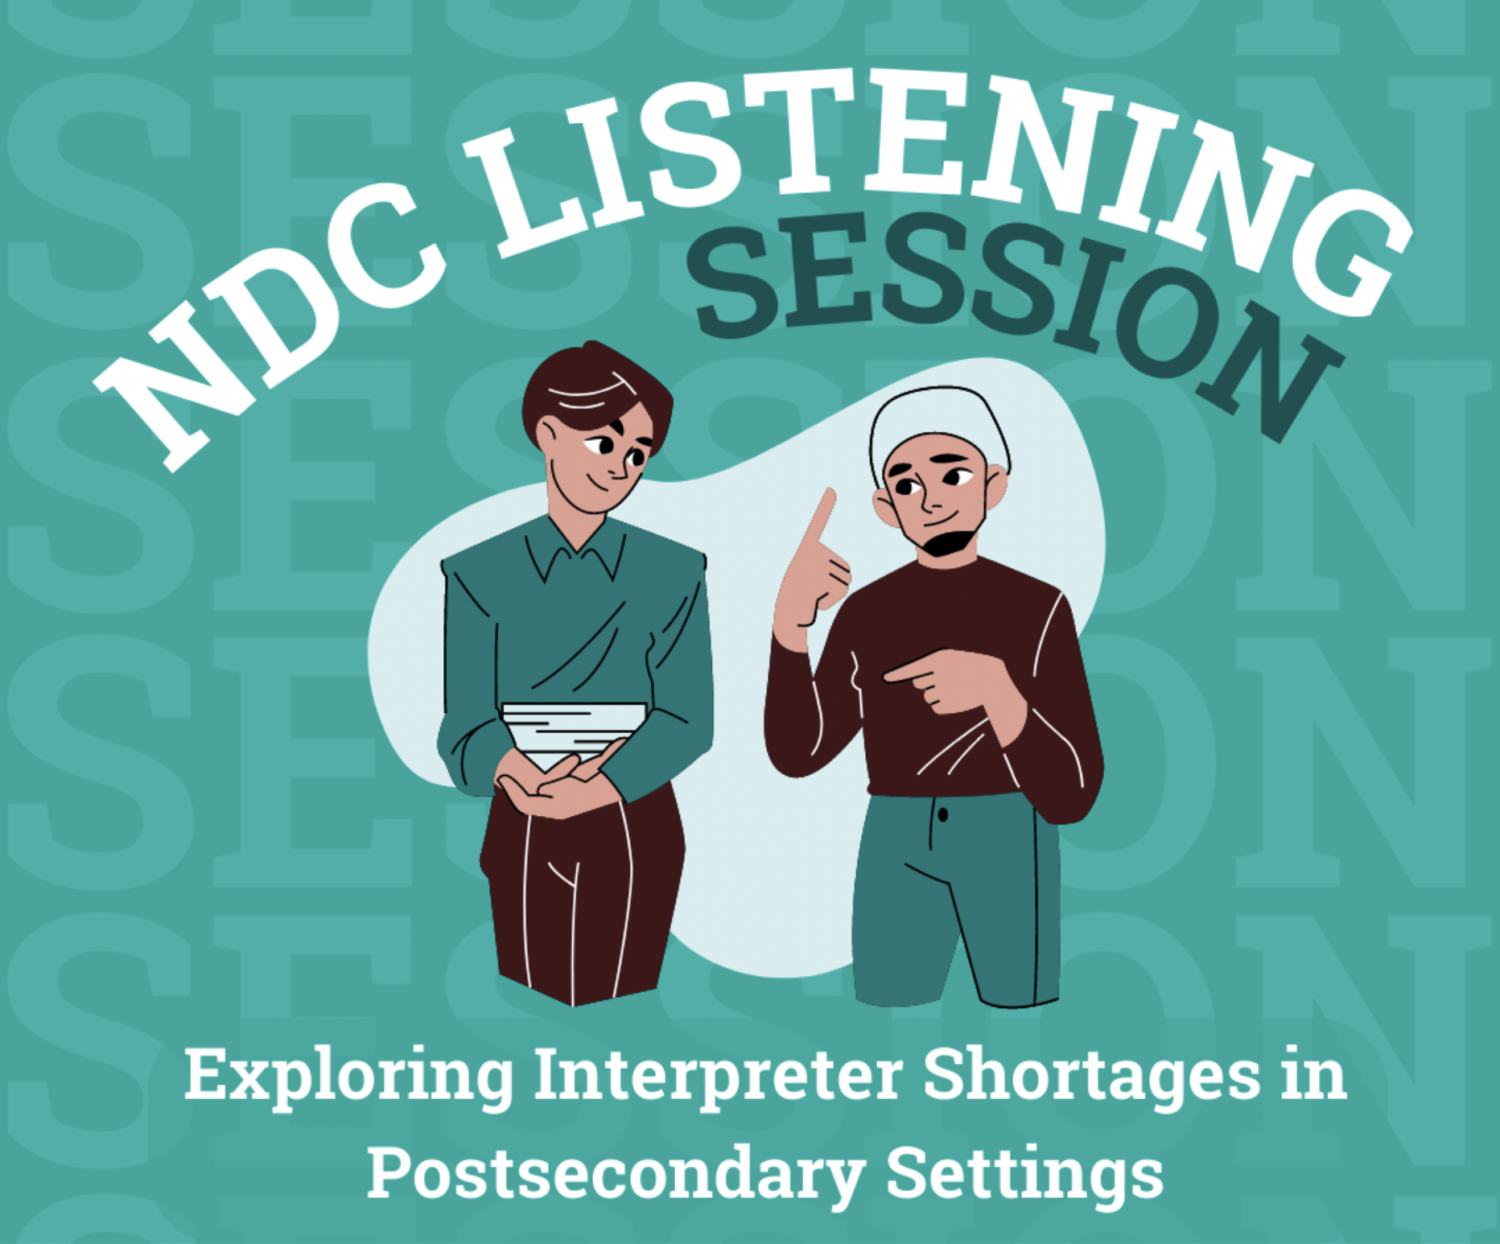 This is a square image. The background is green. On the Top, there is the Text " NDC Listening Session". In the Center, there is a cartoon image of two people having a sign-language conversation. Below that there is the text " Exploring Interpreter Shortages in Postsecondary Settings.